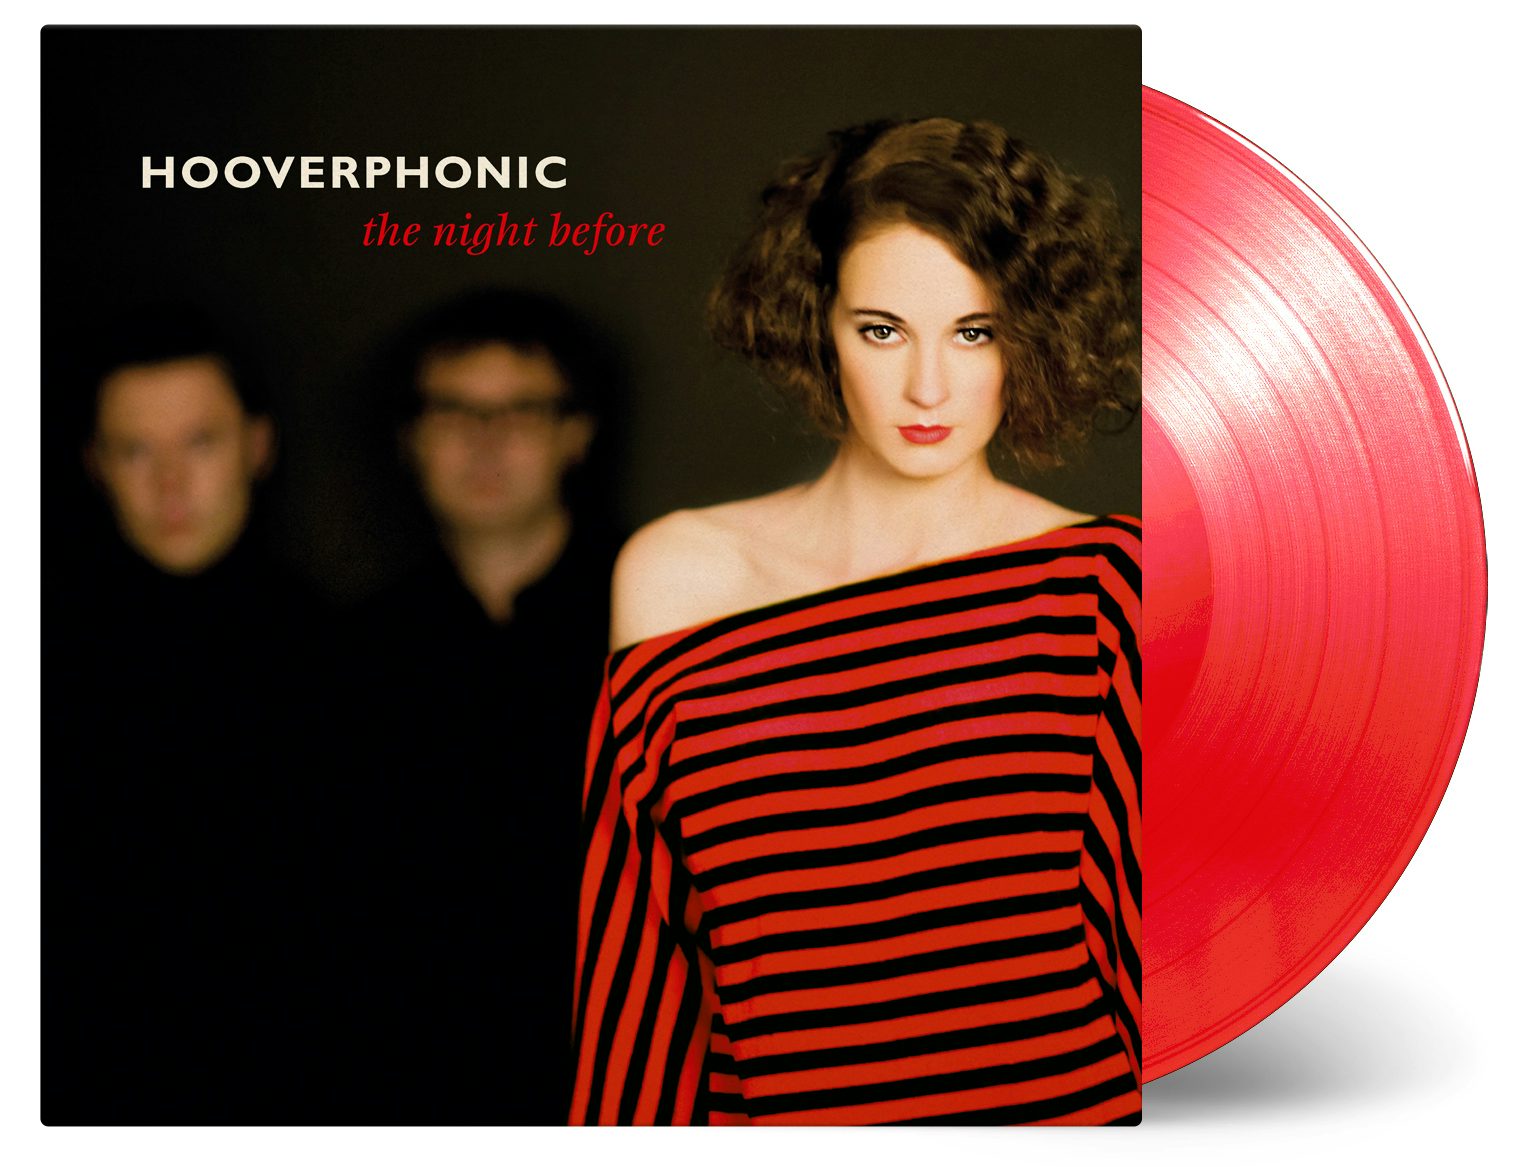 hooverphonic no more sweet music